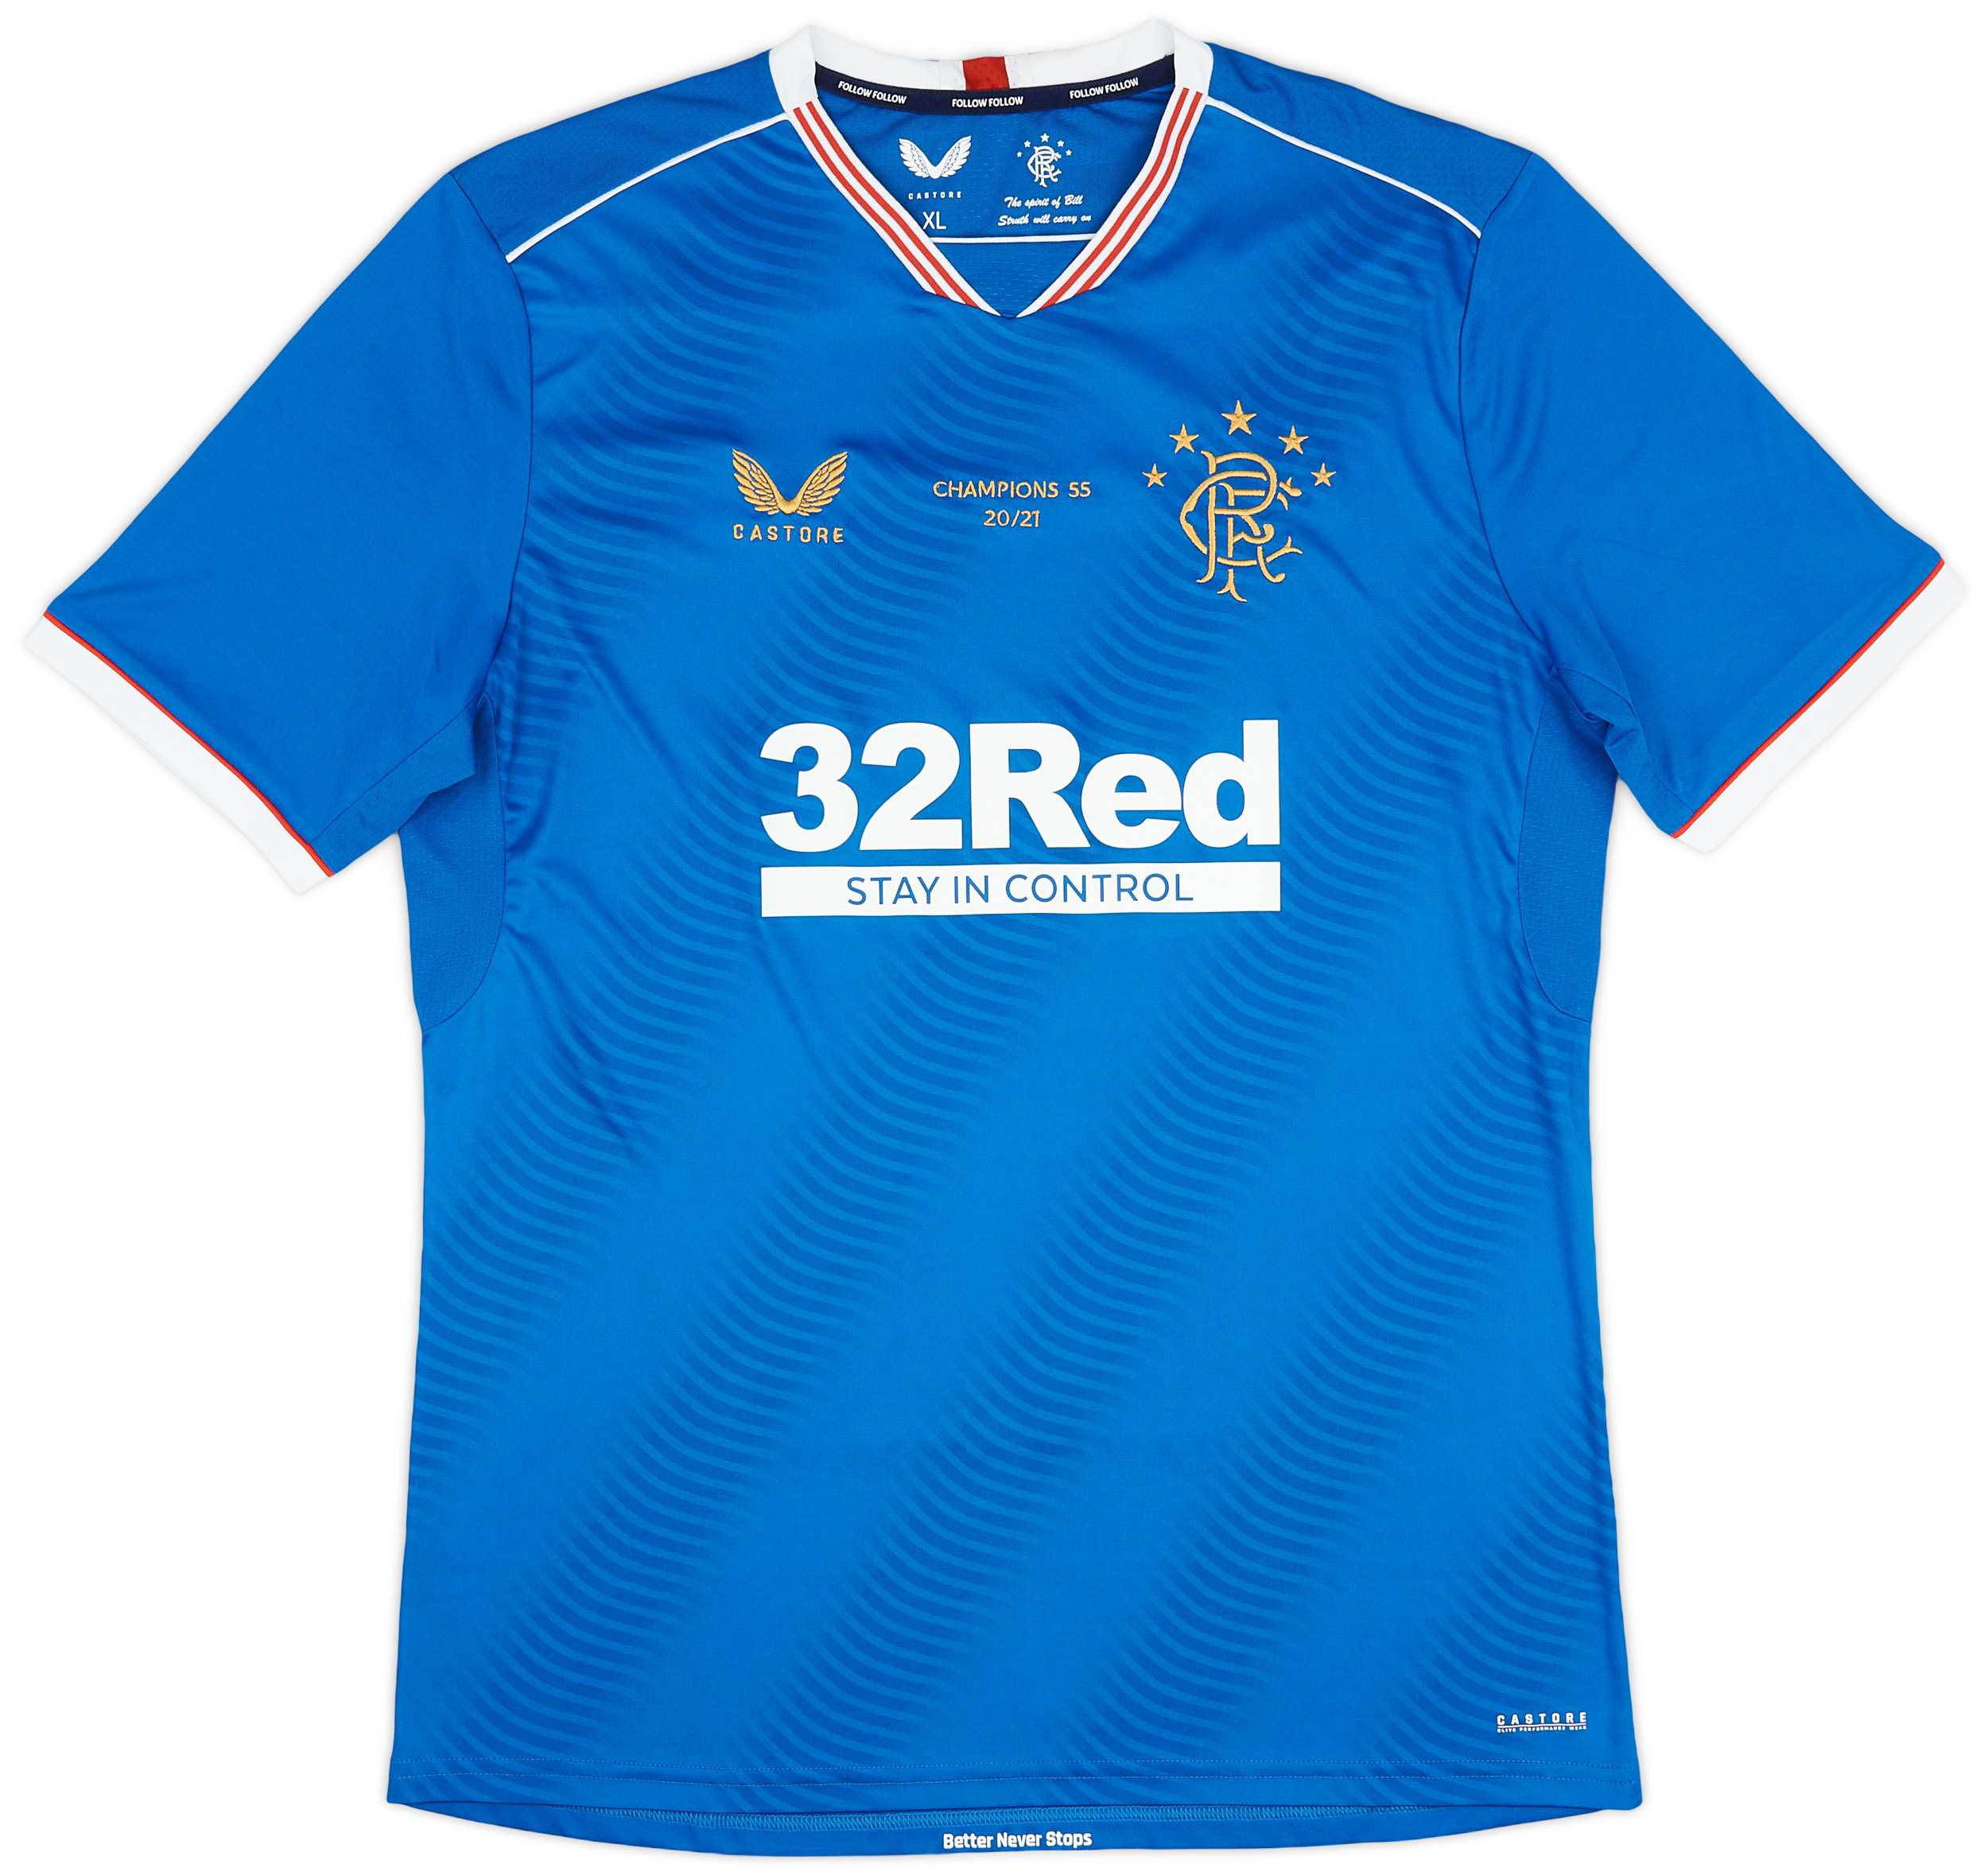 2020-21 Rangers Special Edition 'Champions 55 20/21' Home Shirt - 9/10 - ()